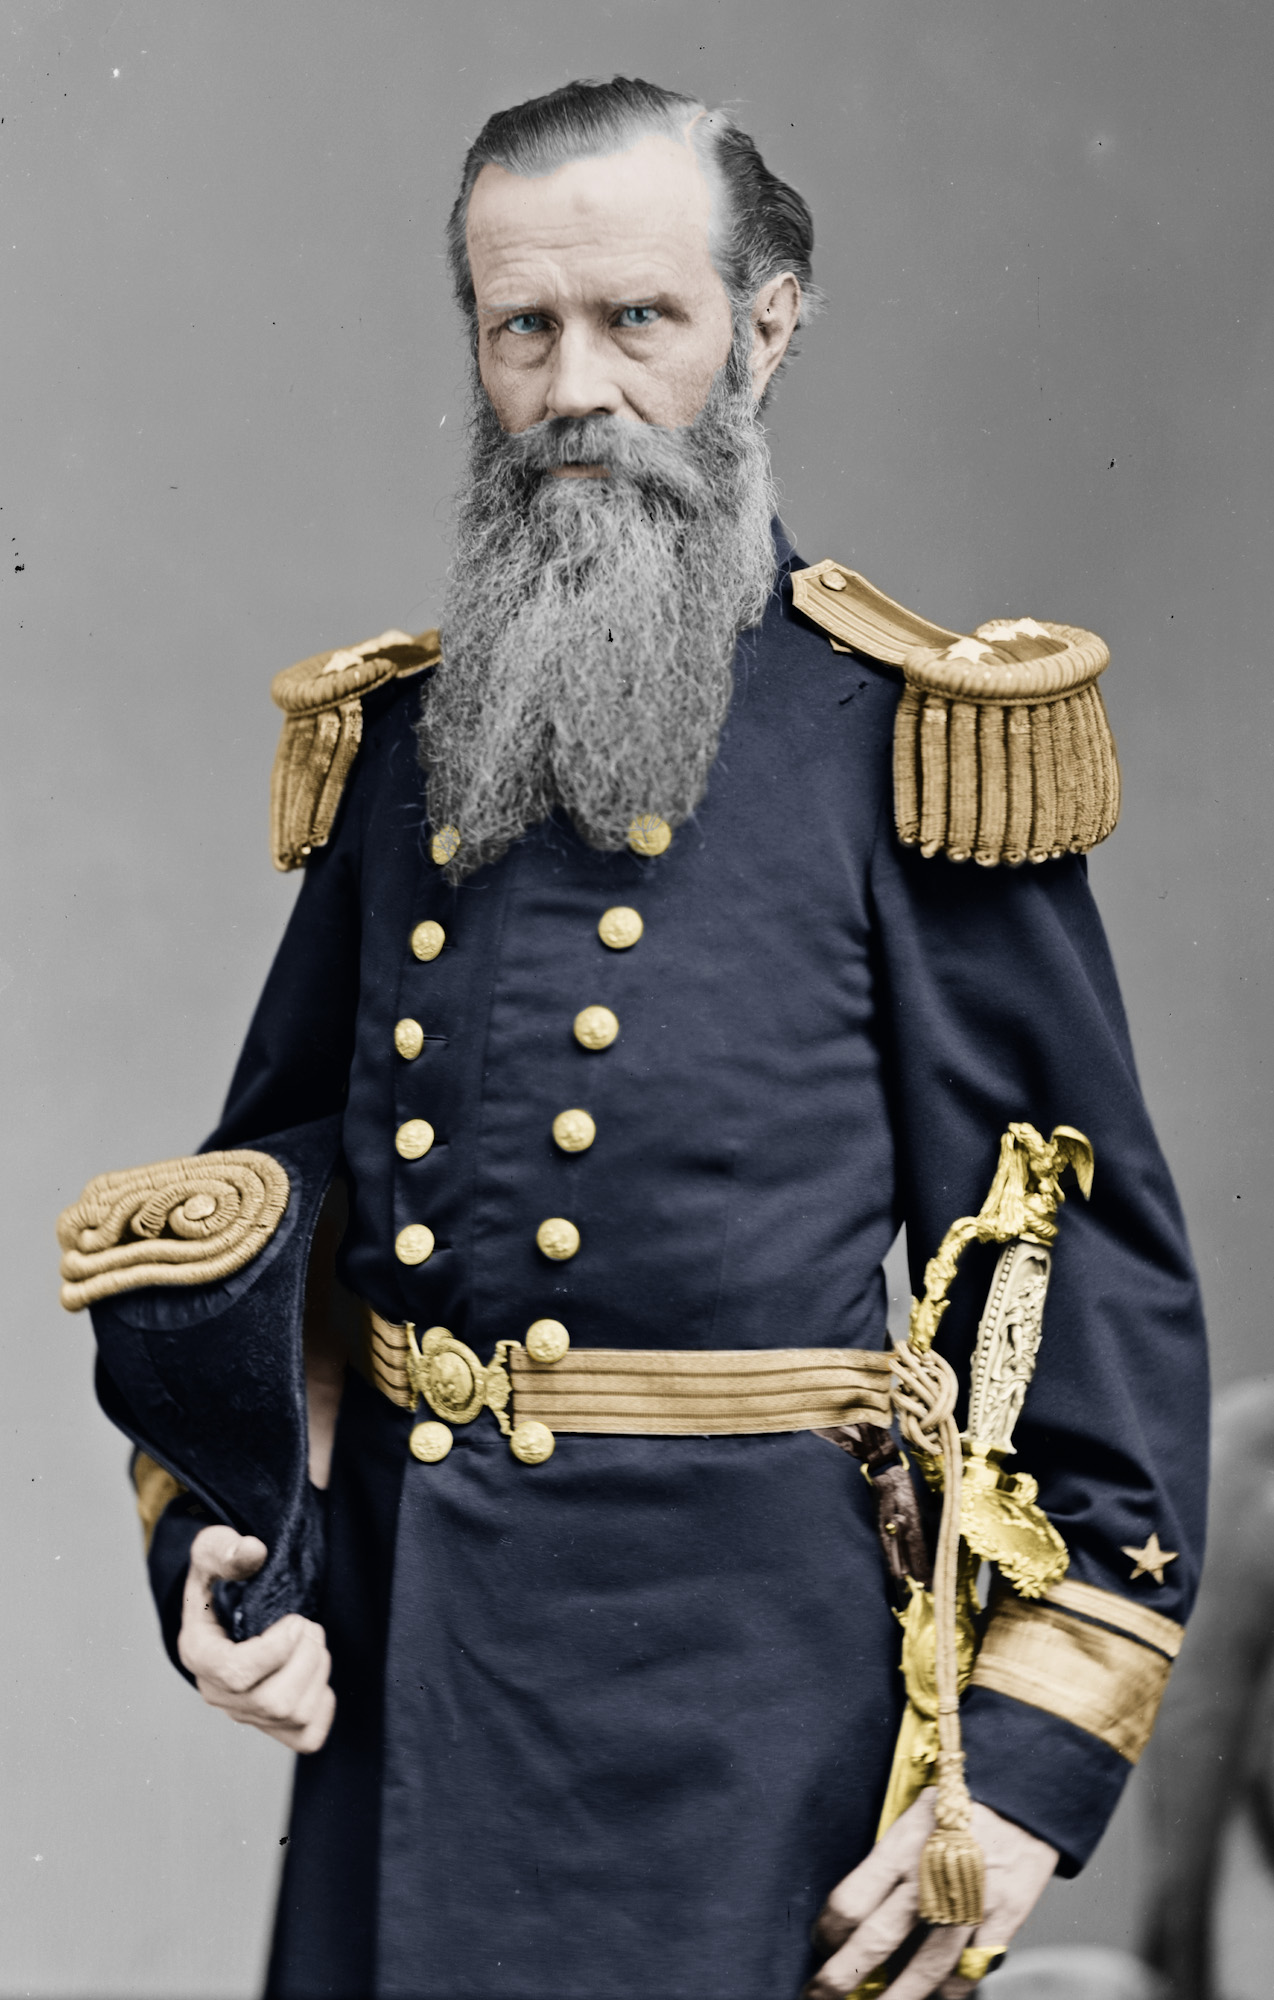 A colorized version of a picture of Admiral John Lorimer Worden.  The original is from the Brady-Handy Collection, Library of Congress Prints and Photographs Division Washington, D.C.

When Admiral Worden was a lieutenant he was the commanding officer of the U.S.S. Monitor during the fight against the C.S.S. Virginia at Hampton Roads. View full size